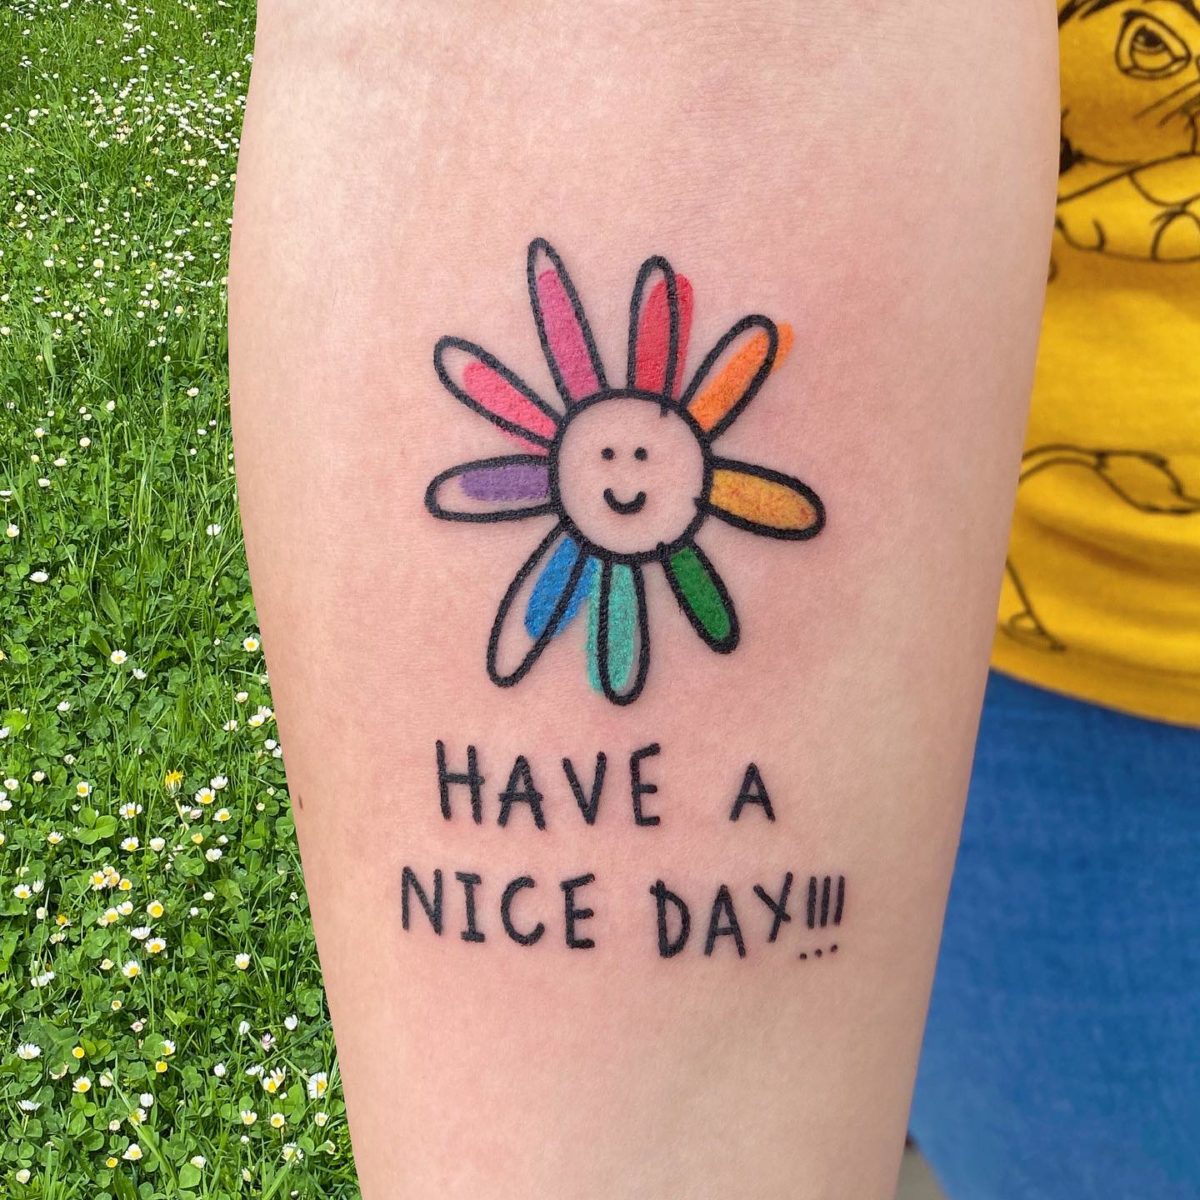 10 Meaningful Tattoos That Will Convince You To Get Inked